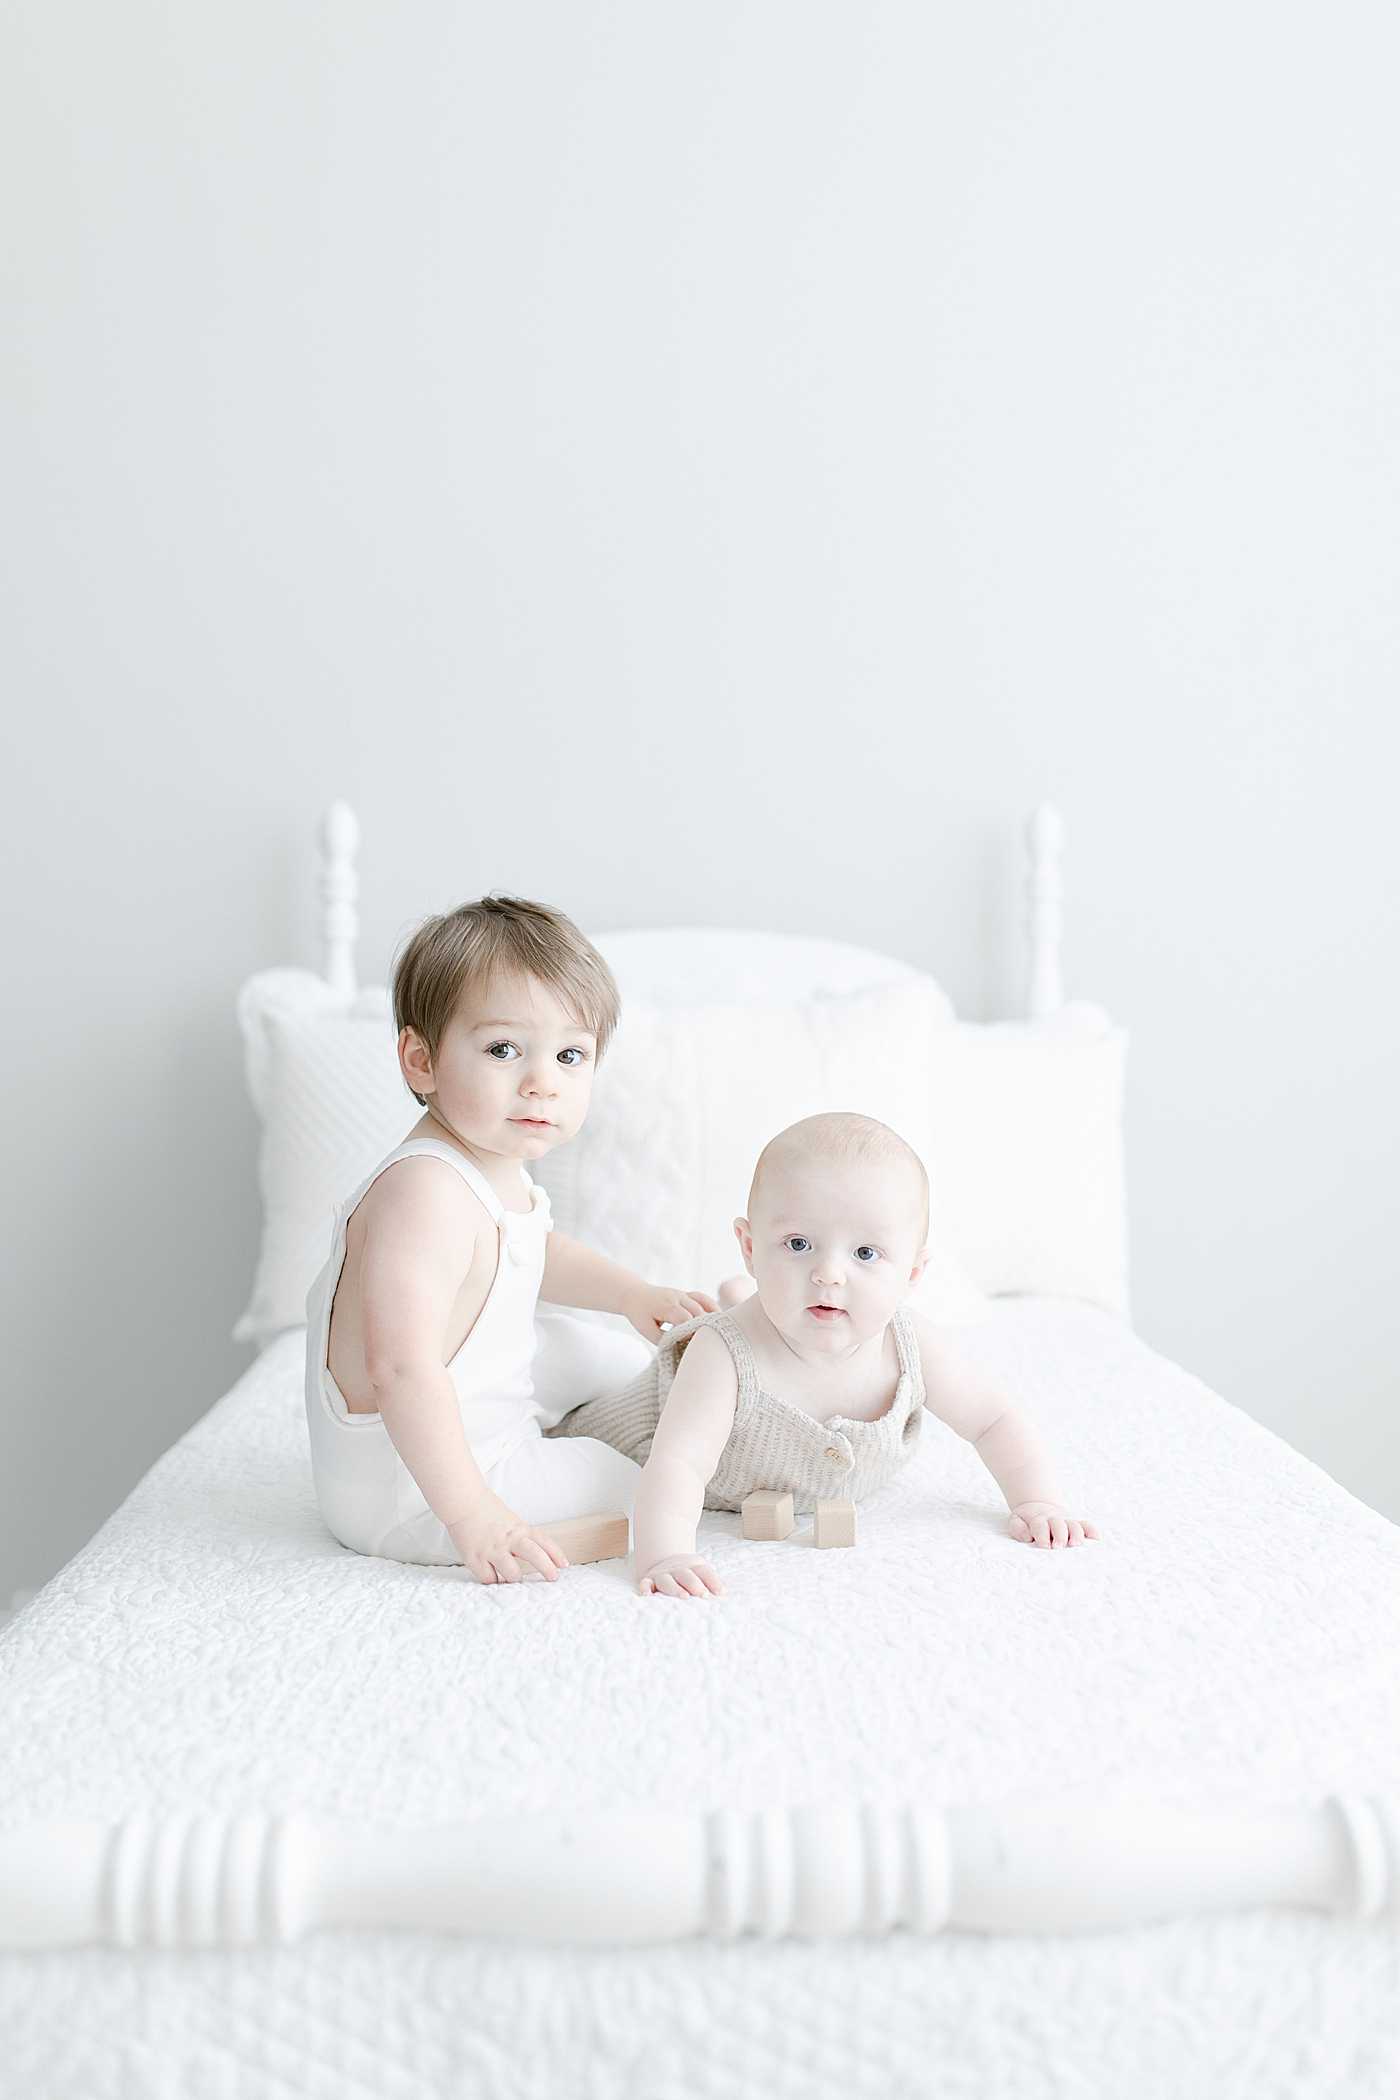 Two brothers, less than a year apart, sitting on bed together. Photo by Little Sunshine Photography